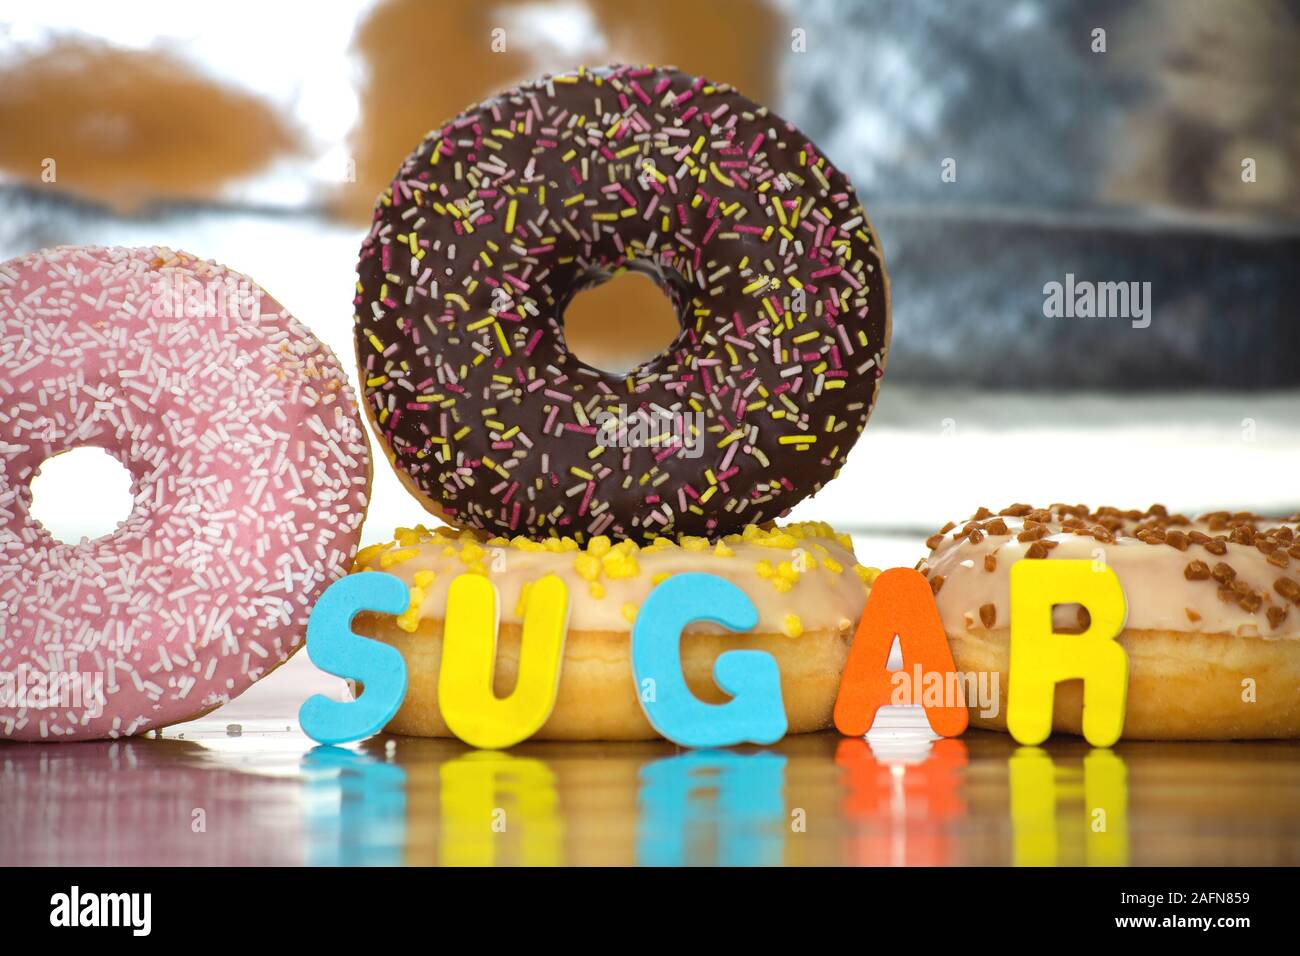 Group of delicious colorful glazed donuts near colorful background with the word sugar Stock Photo